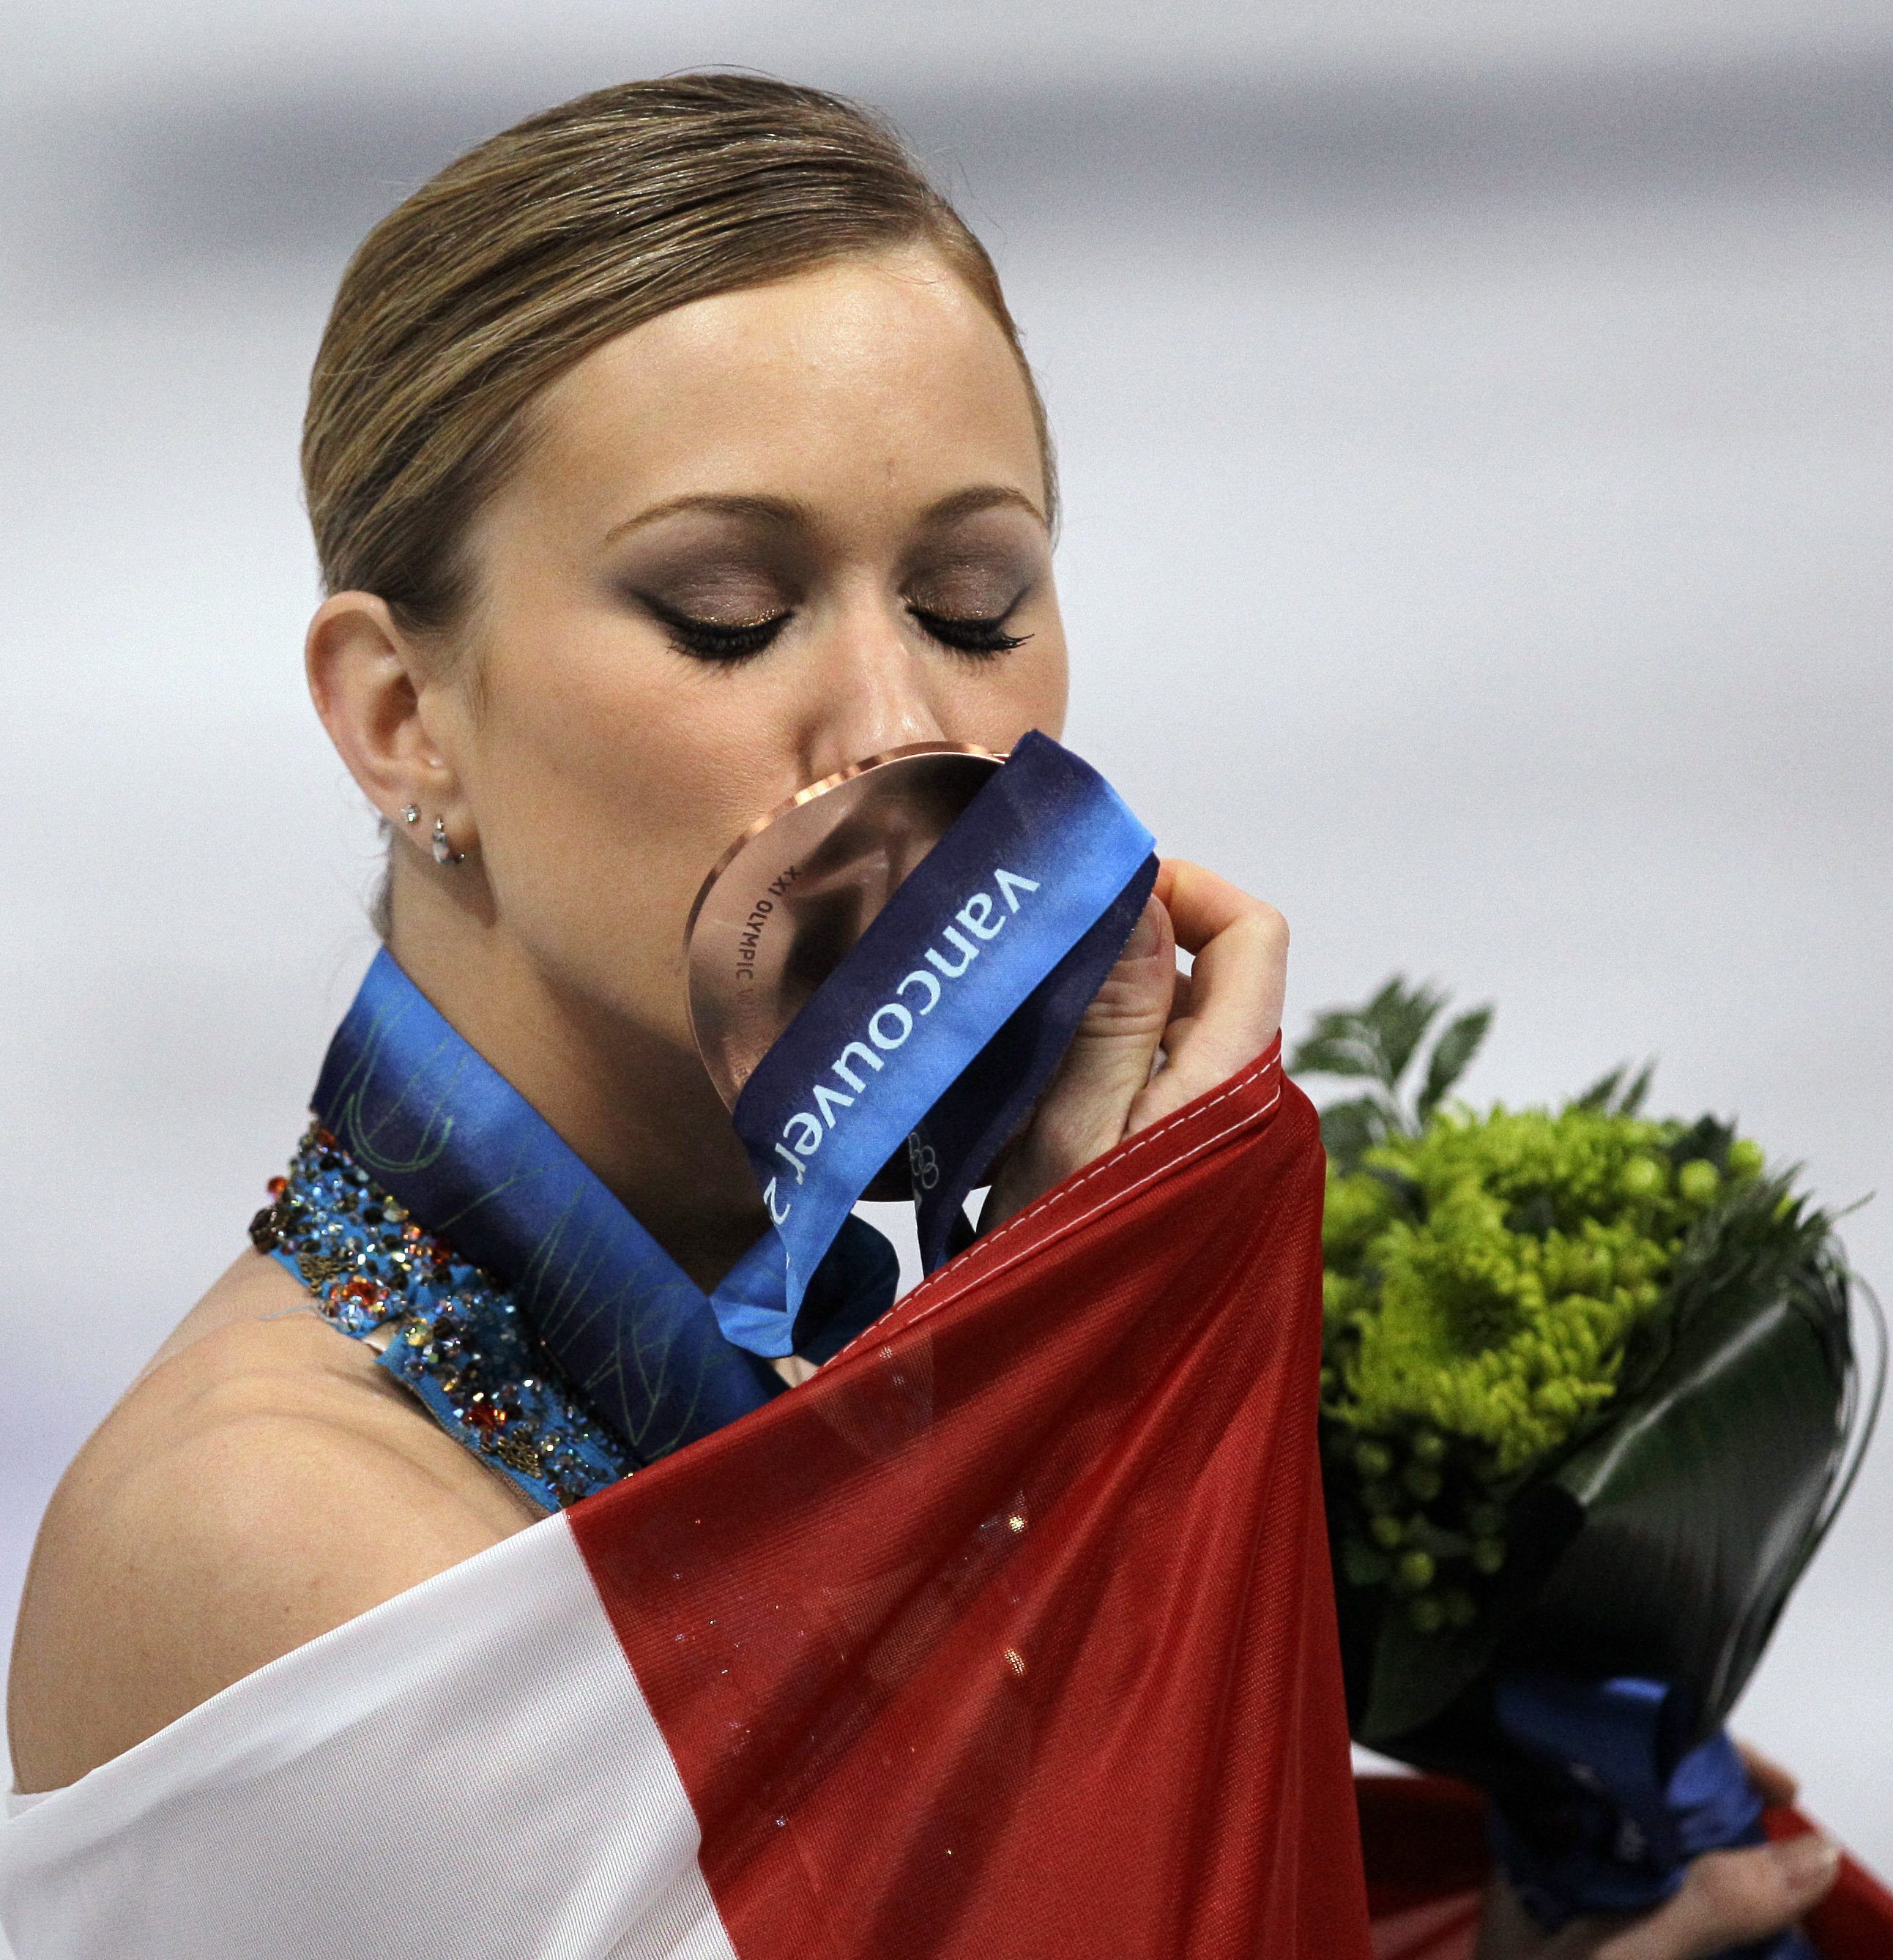 Joannie Rochette kisses her bronze medal during the victory celebration at the Vancouver 2010 Olympics